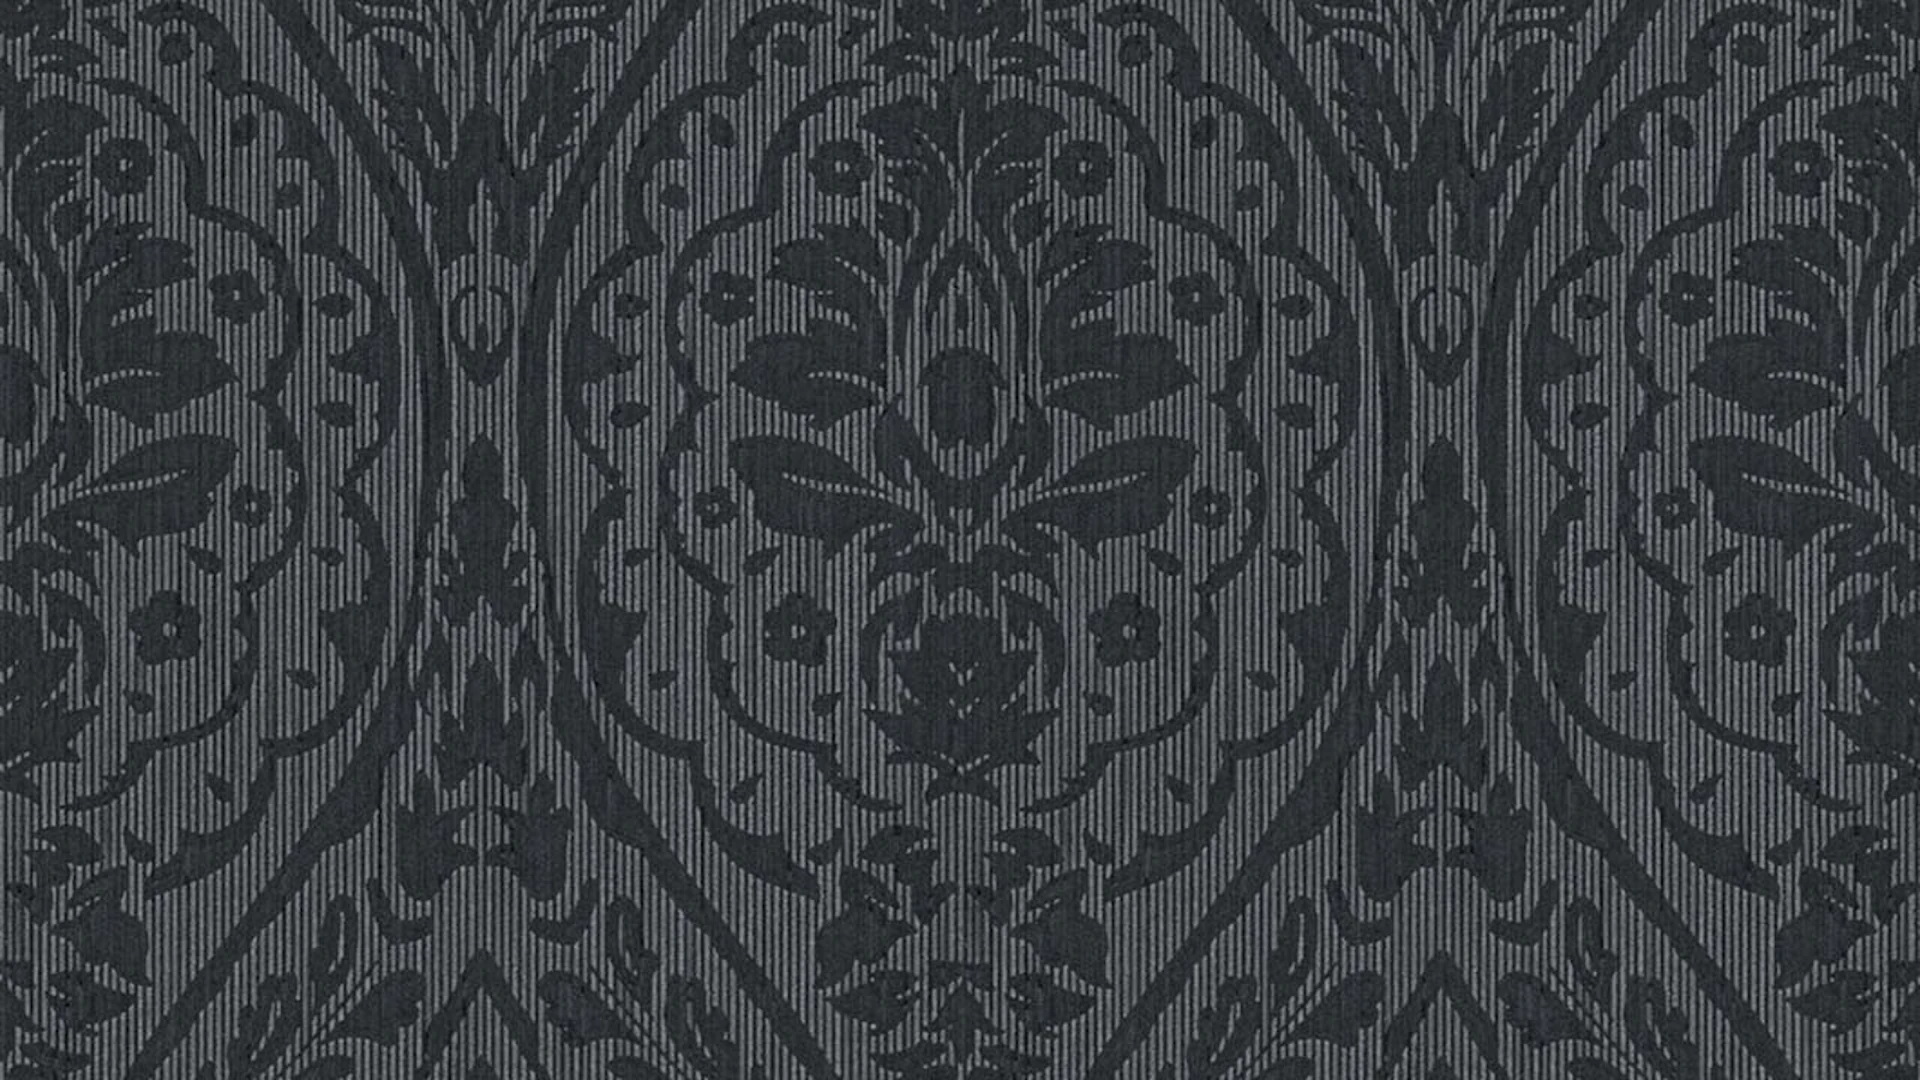 Textile thread wallpaper black classic vintage country house ornaments flowers & nature tessuto 2 959